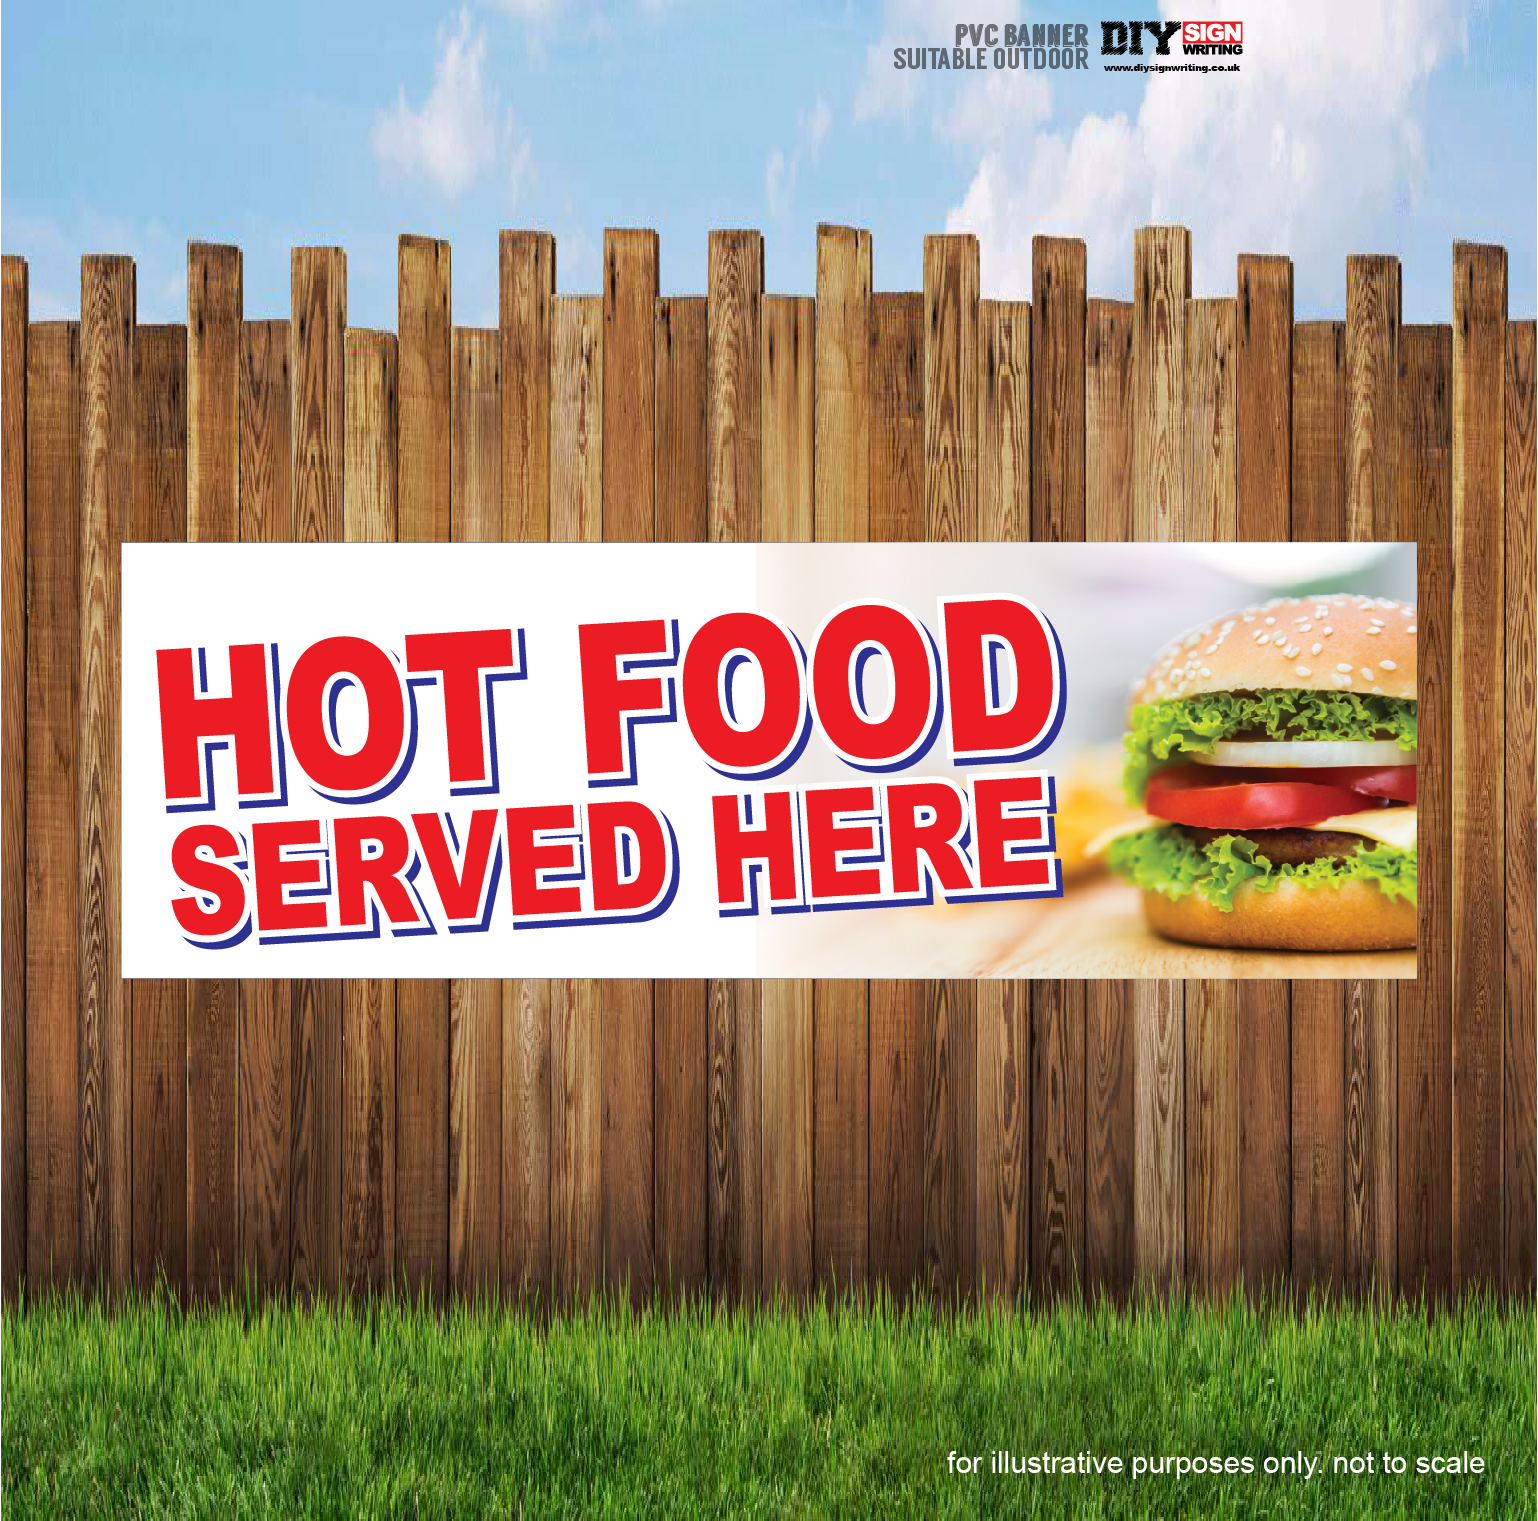 Hot Food Served Here Shop Take Away Heavy Duty PVC Banner Sign 2466 